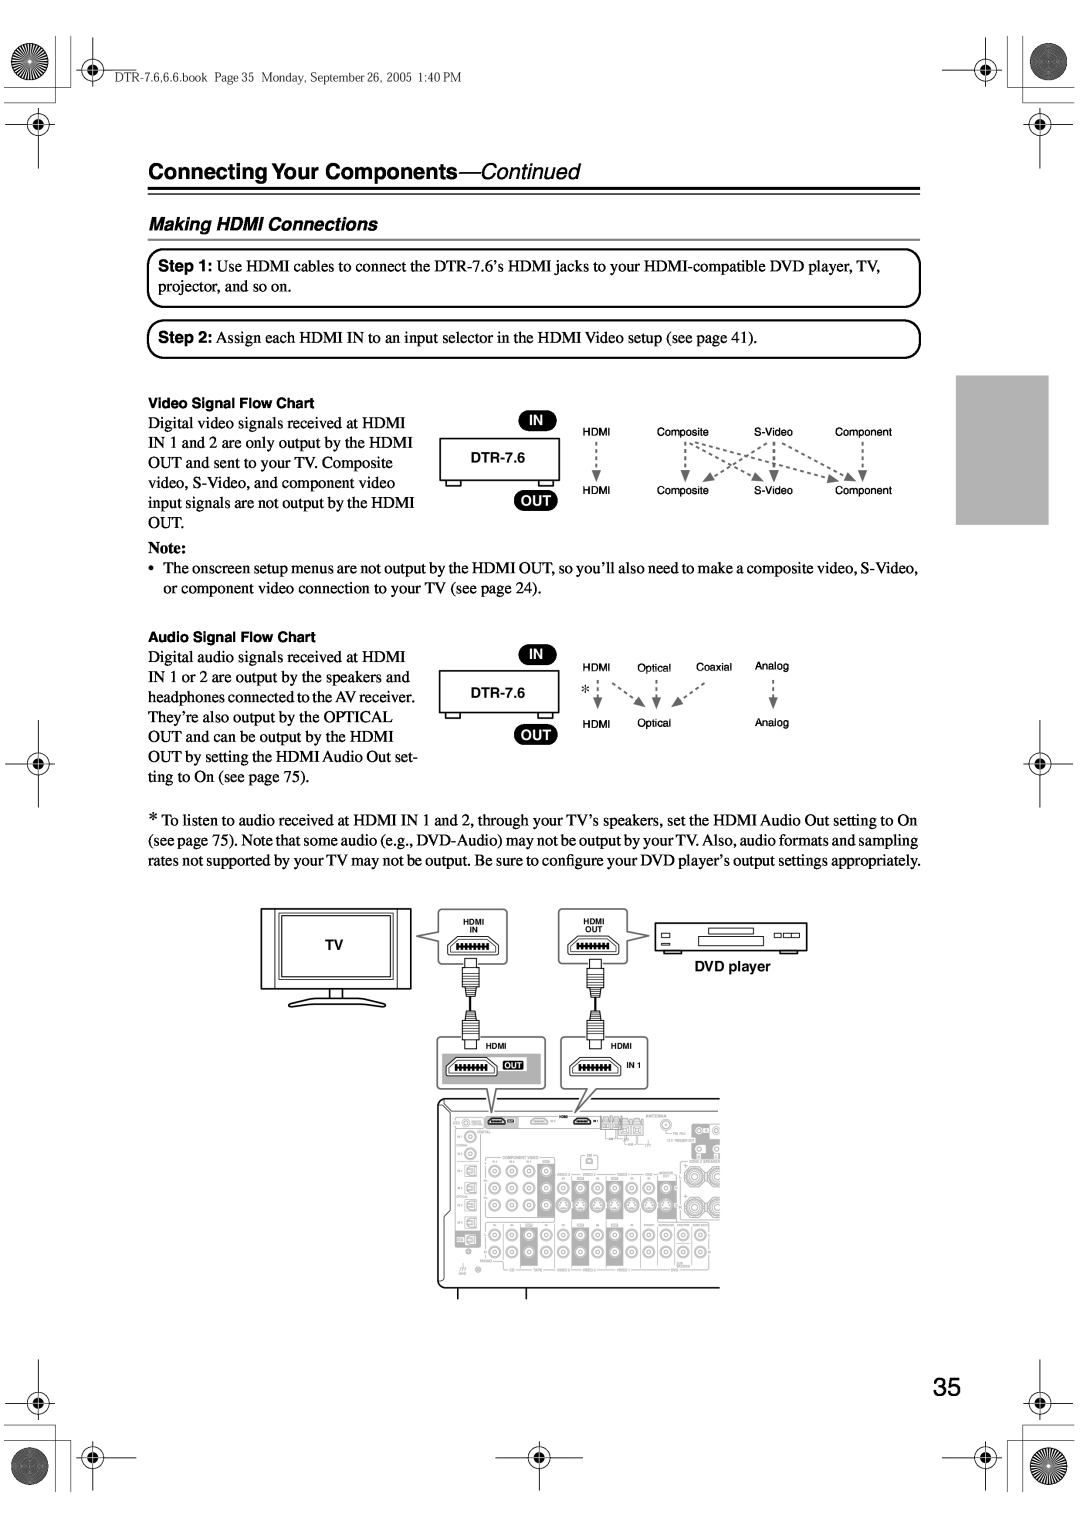 Integra DTR-7.6/6.6 Making HDMI Connections, Connecting Your Components-Continued, Video Signal Flow Chart, DVD player 